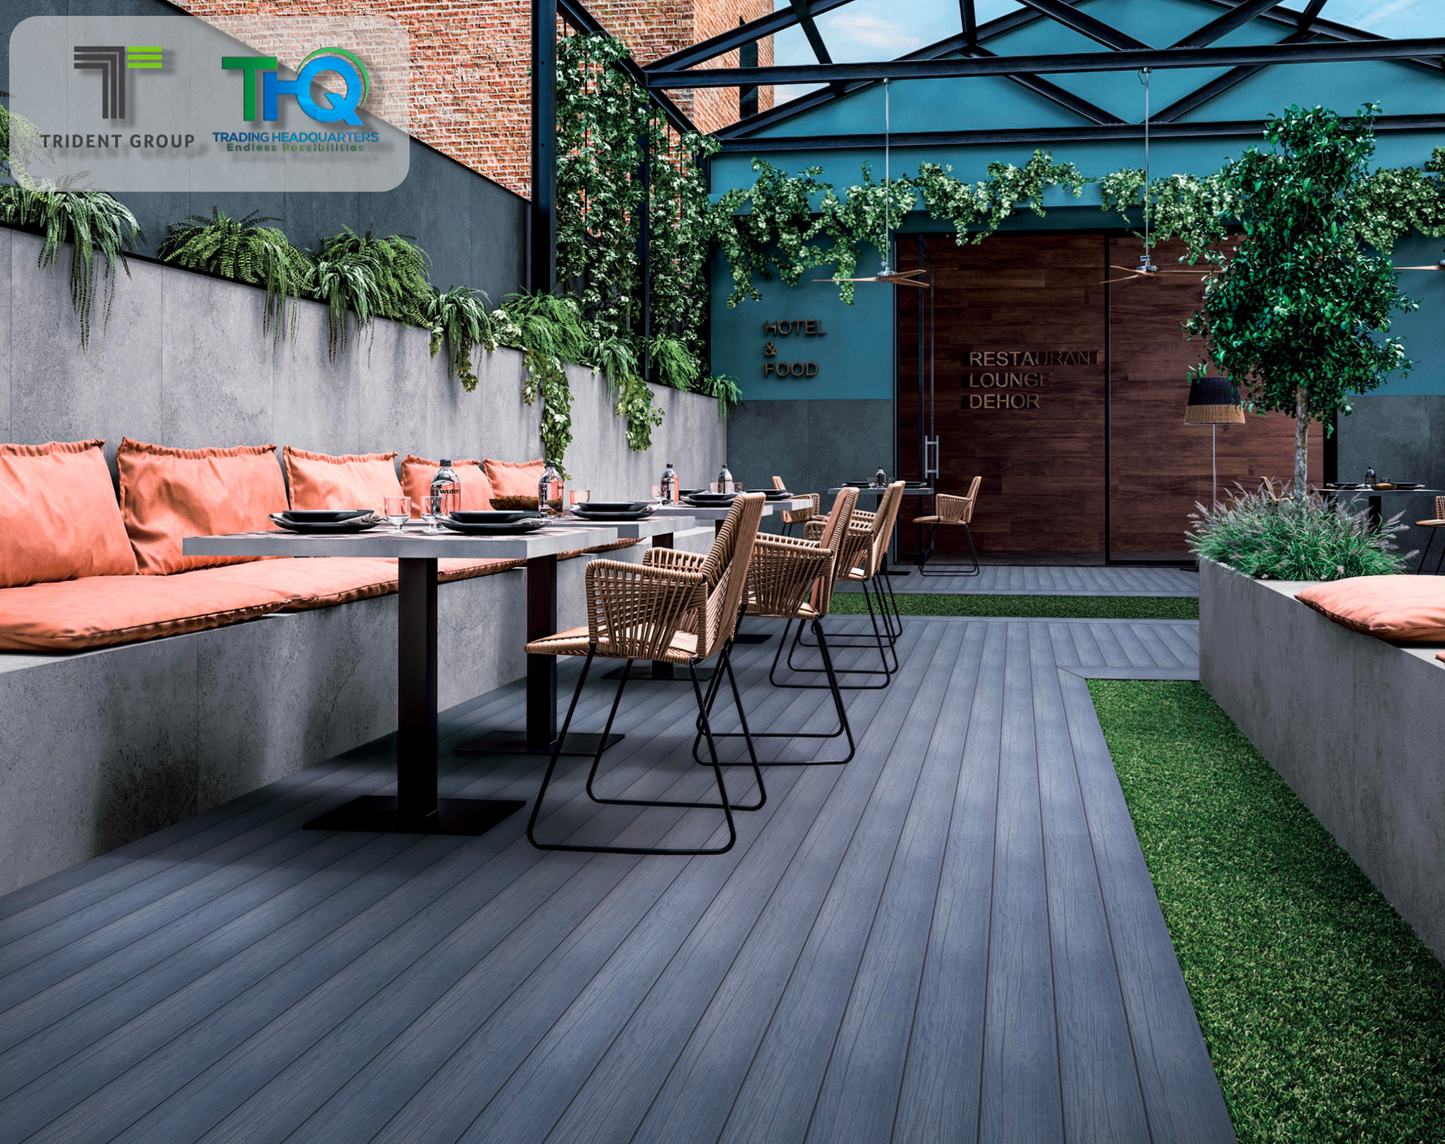 Co-Extrusion Decking - Sky Grey